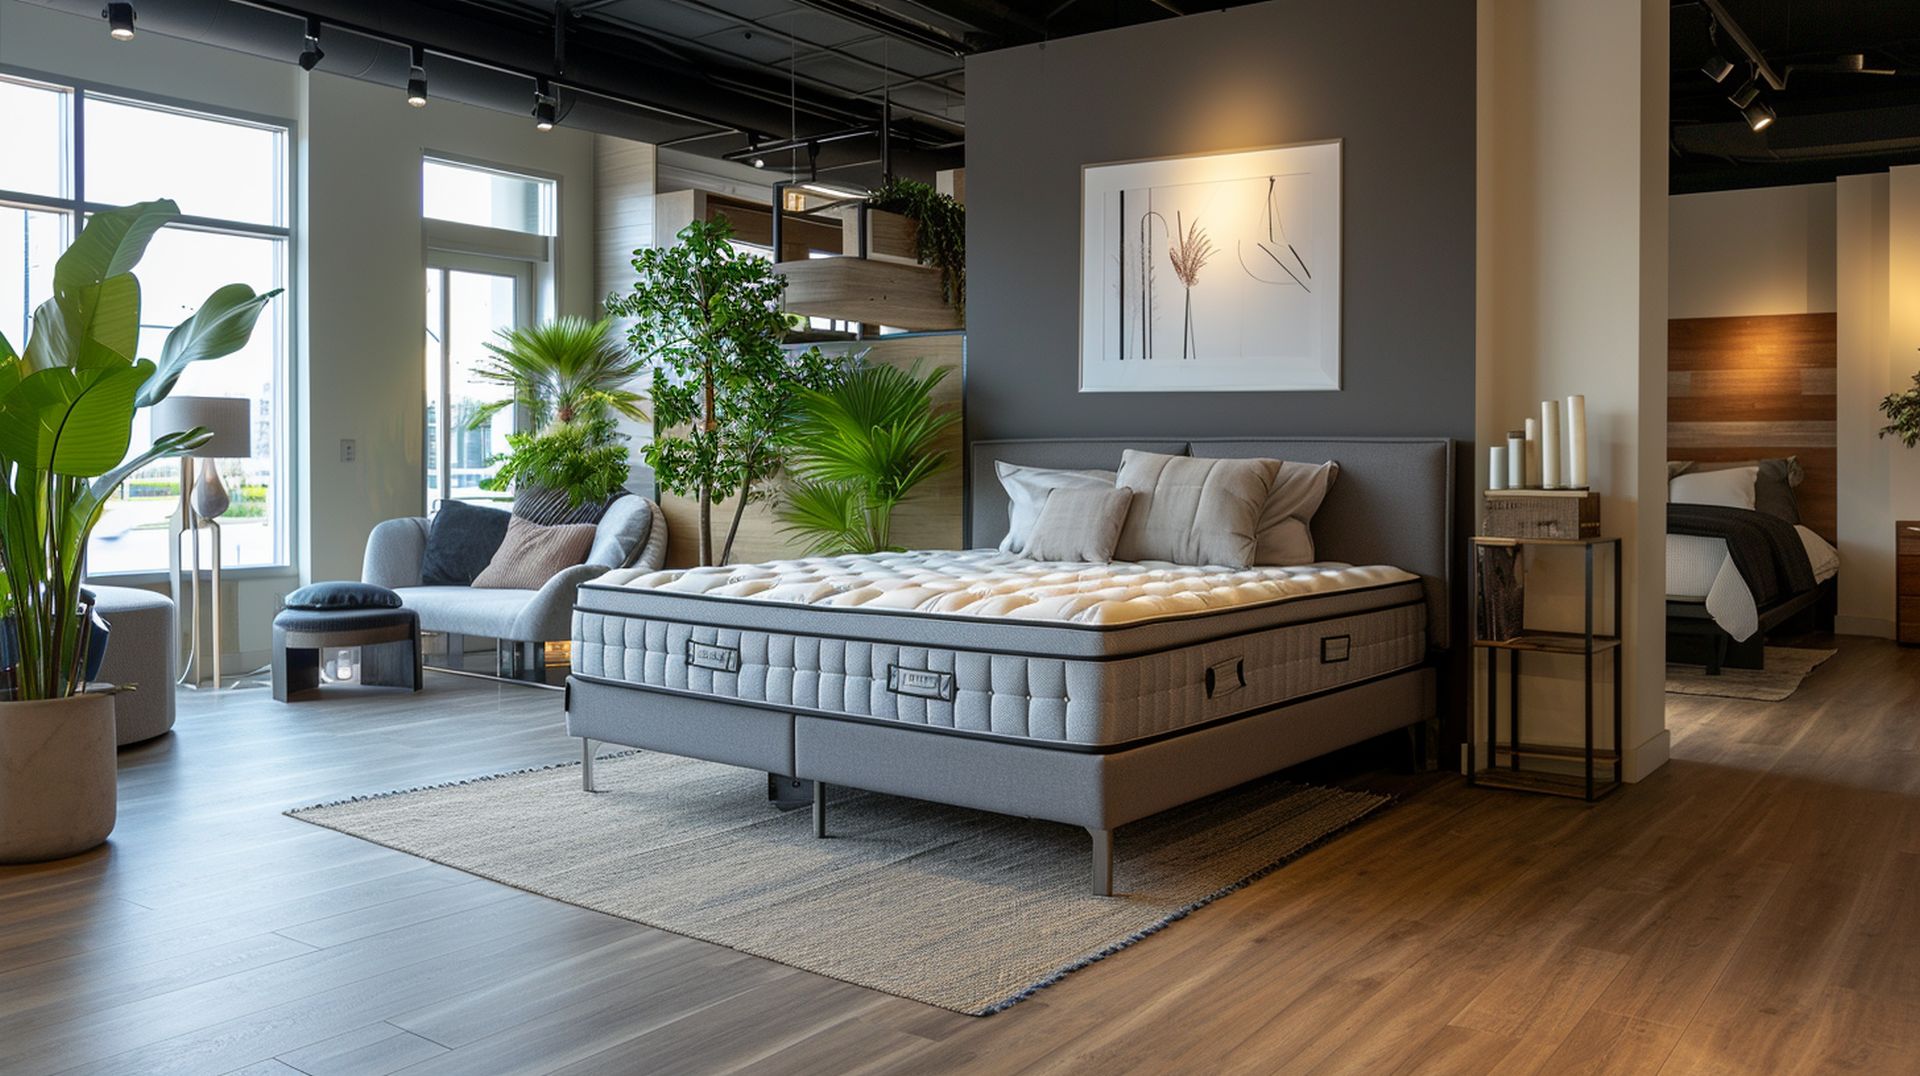 If you're looking for a new bed, mattress stores in Haltom City offer the best customer and delivery service, financing, and warranties in Texas